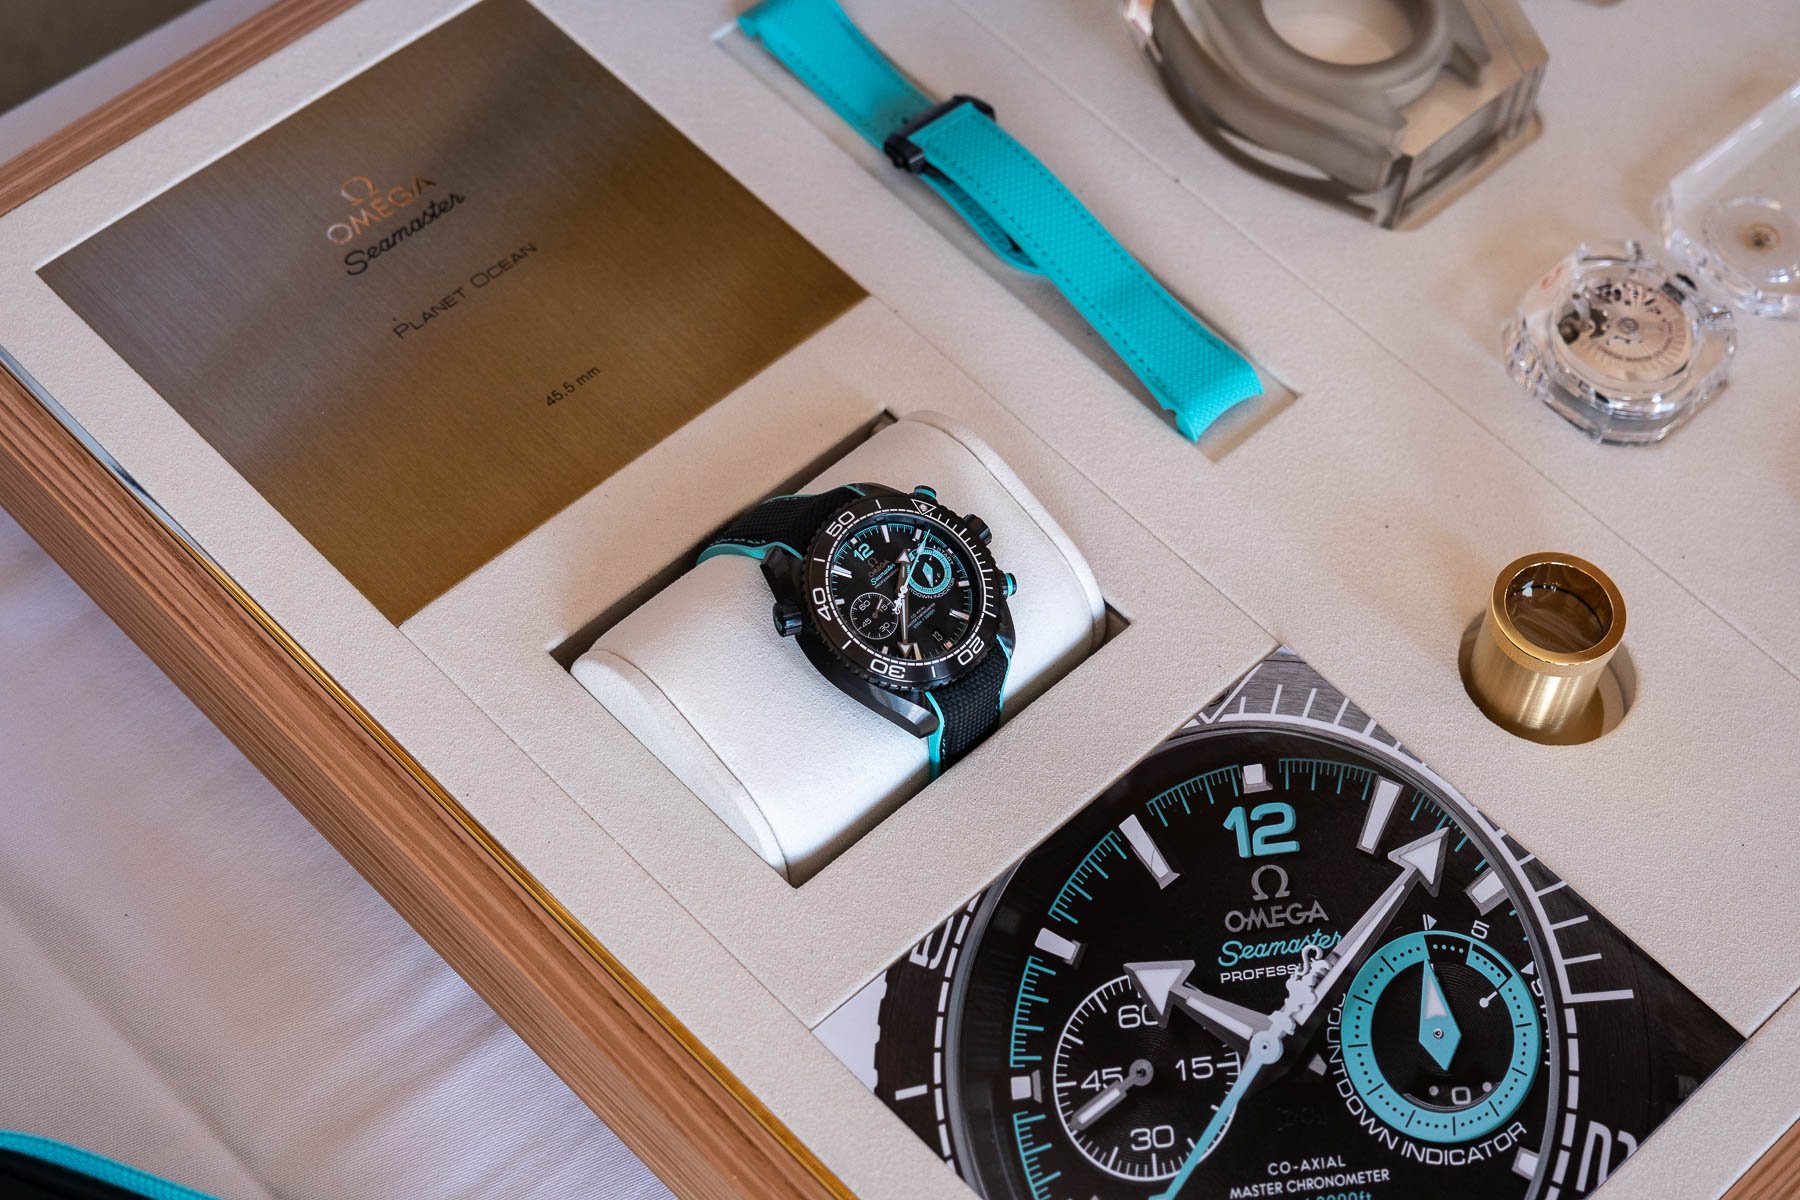 Omega Releases Planet Ocean Watch To Mark Its America's Cup Sponsorship